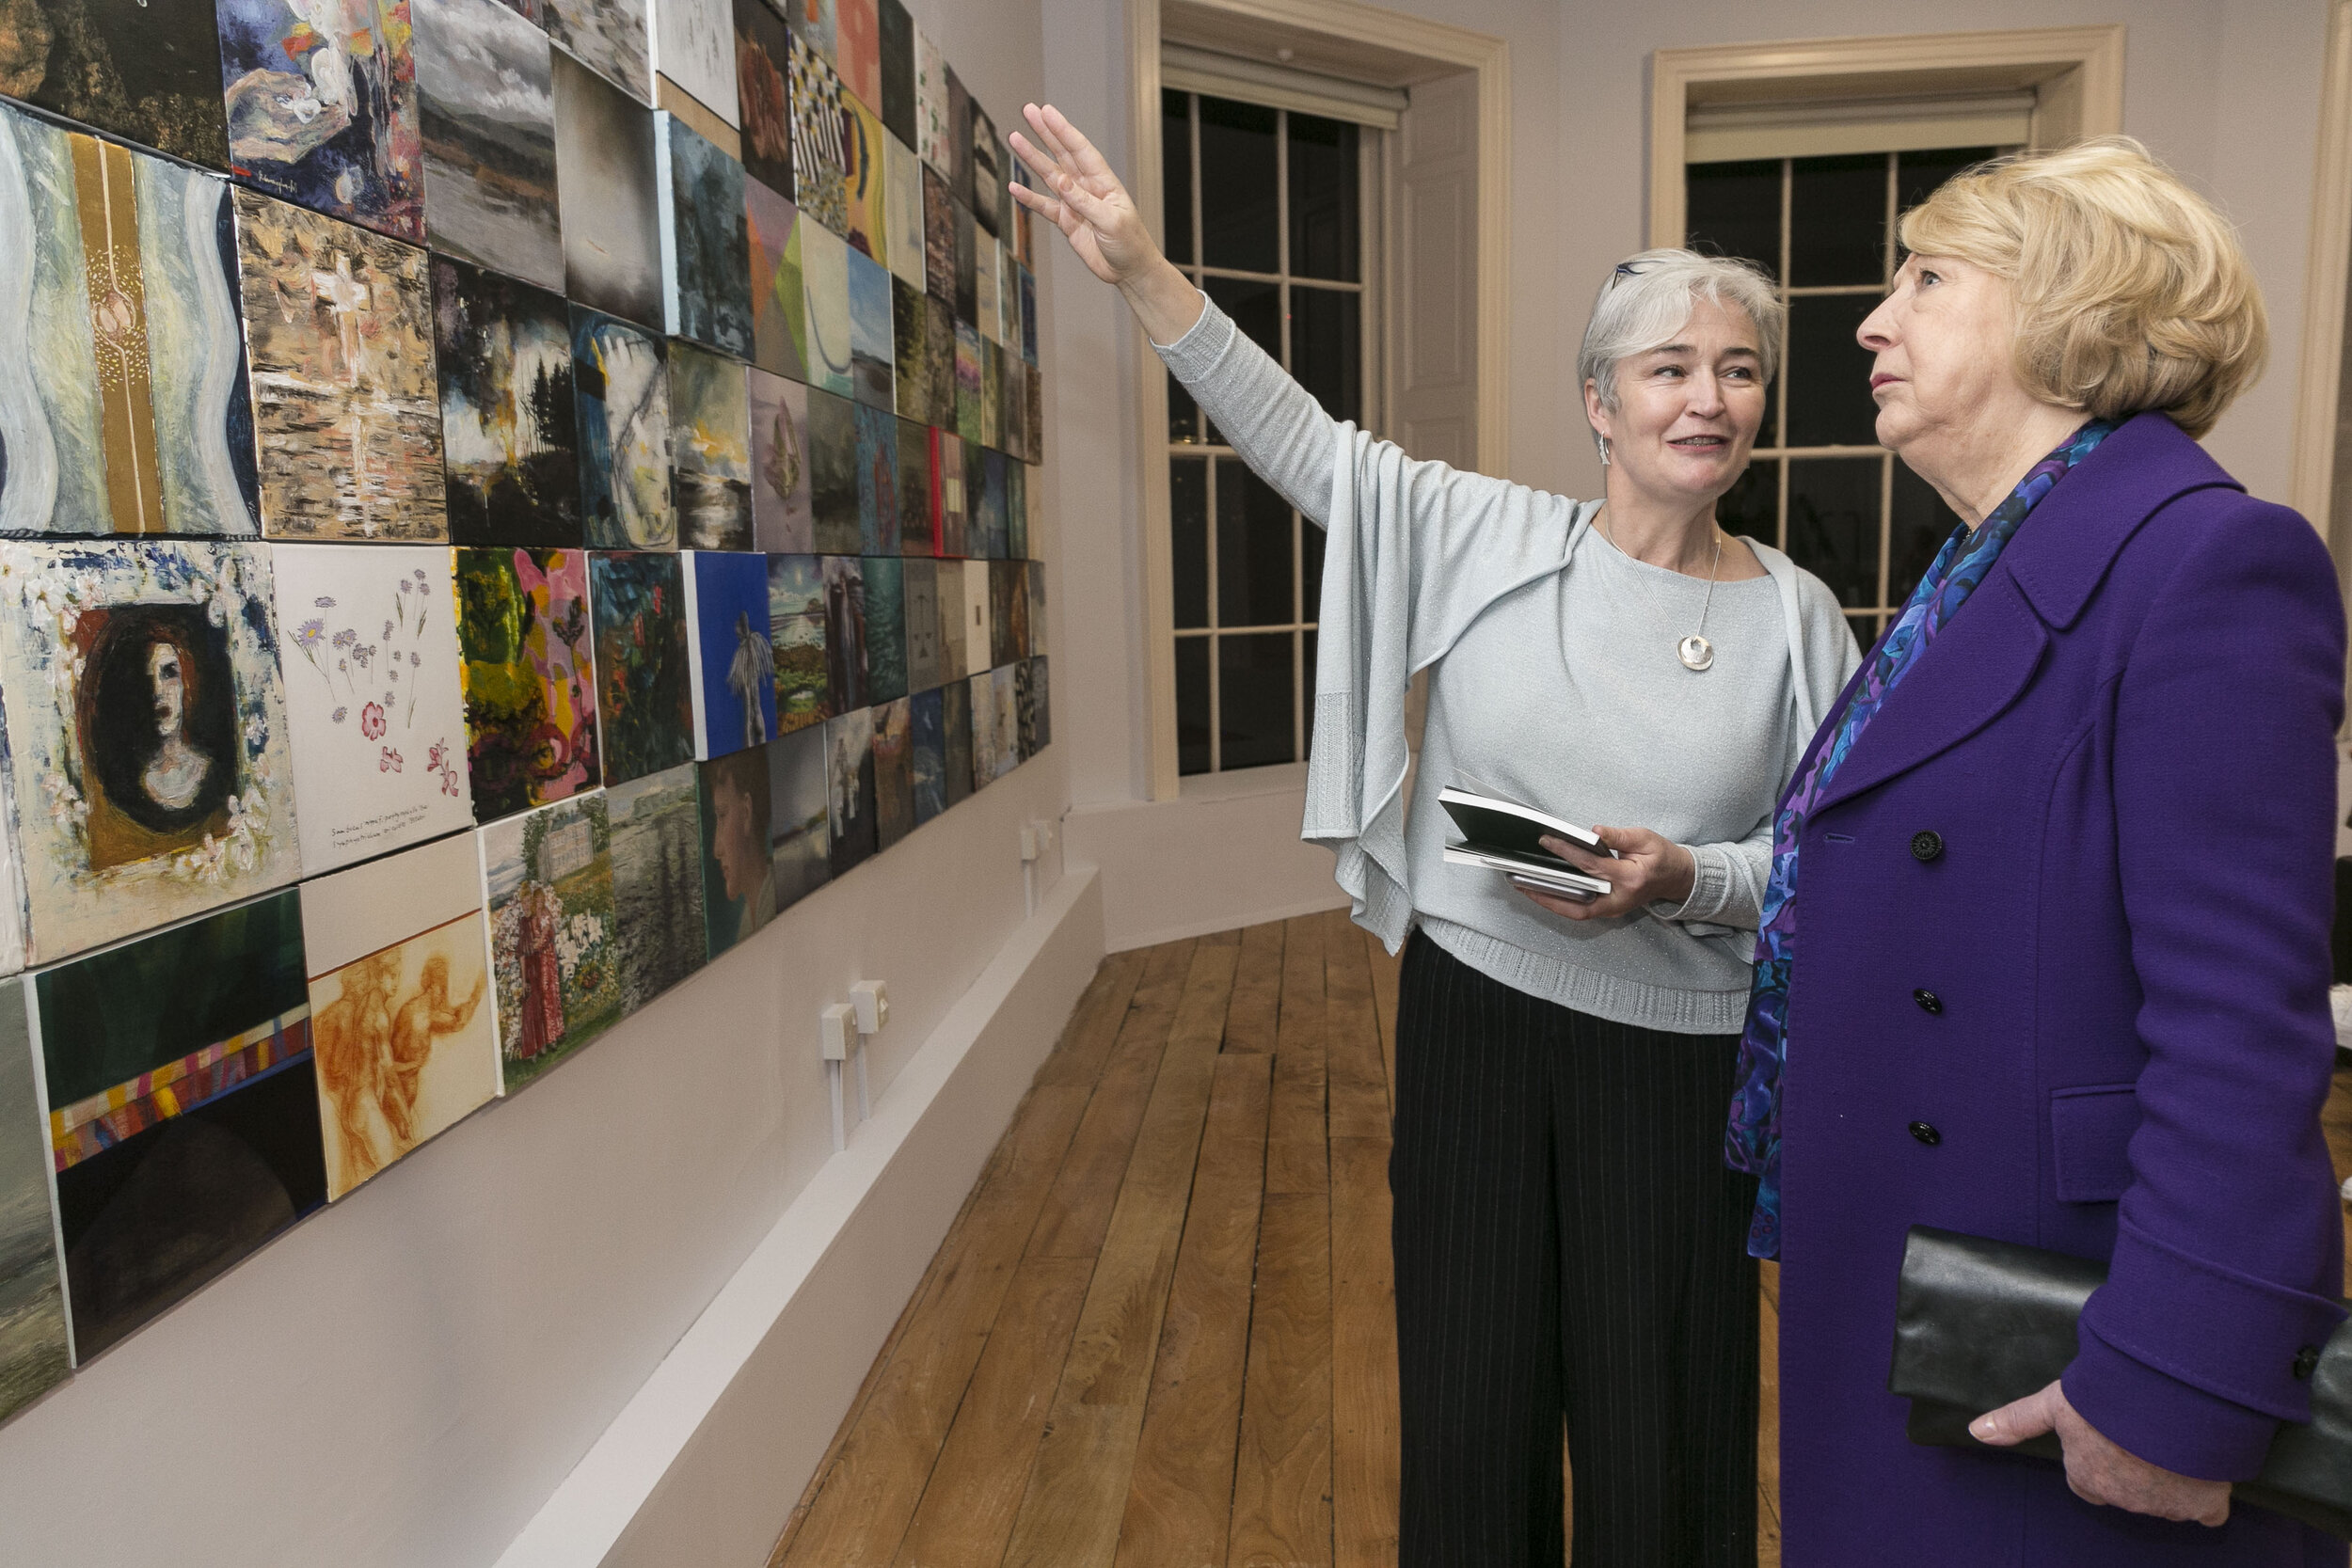  Sabina Higgins viewing some of the 93 art works.   Hamilton Gallery / MoLi / DFAT - exhibition opening by Sabina Higgins of "Eva Gore-Booth 93 Irish women artists respond to her life and work", part of Brigids Day Lá Fhéile Bríde, Celebrating Women 